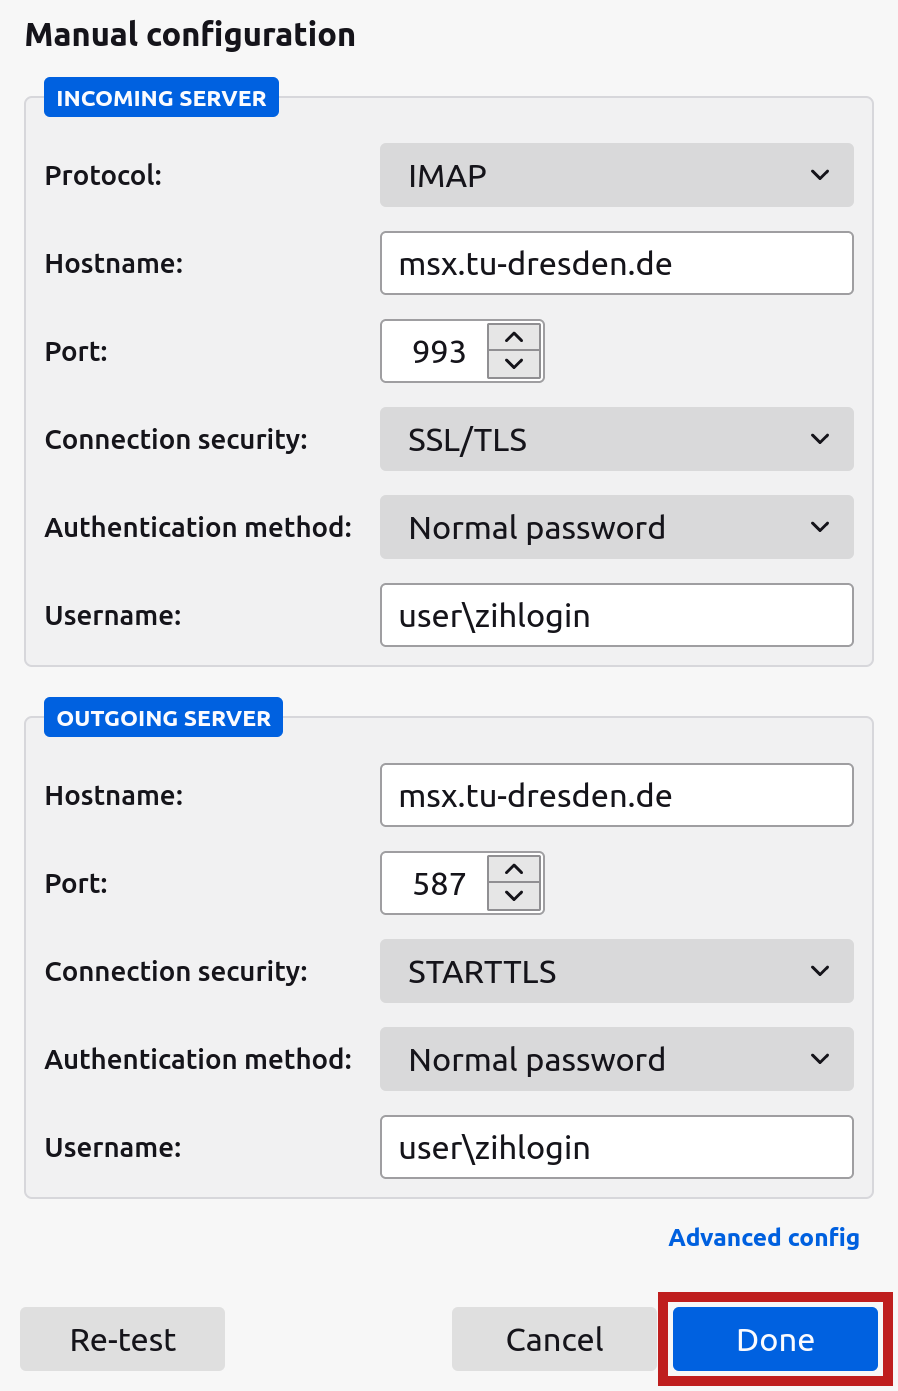 Screenshot of the "Manual Configuration" window in Thunderbird with marker on the "Done" button. There are fields "Protocol", "Hostname", "Port", "Connection security", "Authentication method" and "Username" for the incoming and outgoing servers respectively. Below them are the "Re-test", "Cancel" and "Done" buttons.